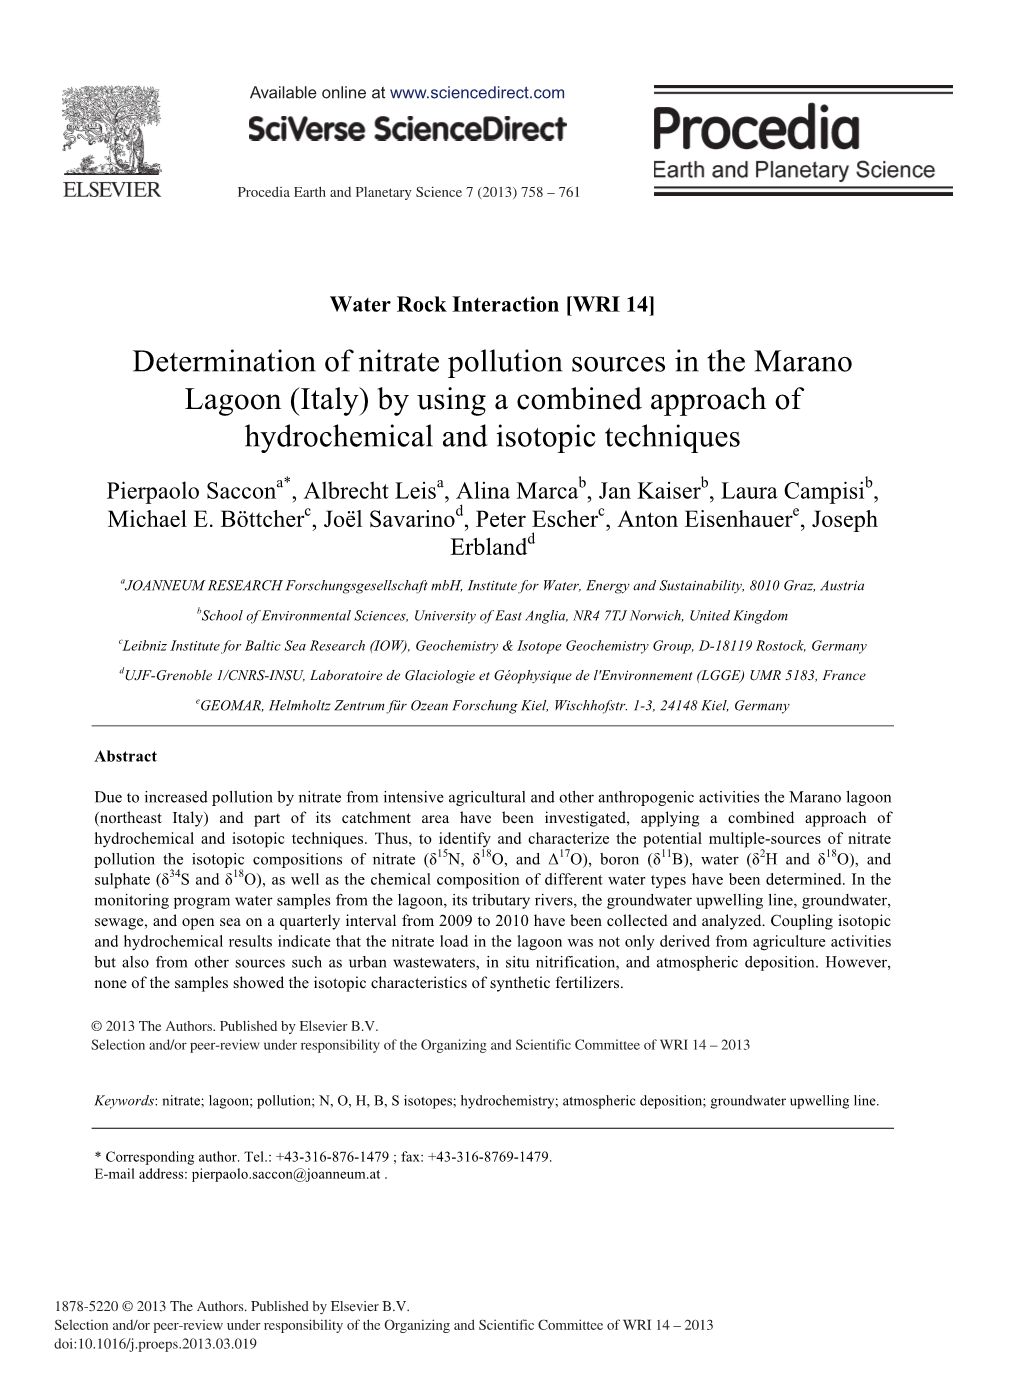 Determination of Nitrate Pollution Sources in the Marano Lagoon (Italy) by Using a Combined Approach of Hydrochemical and Isotopic Techniques